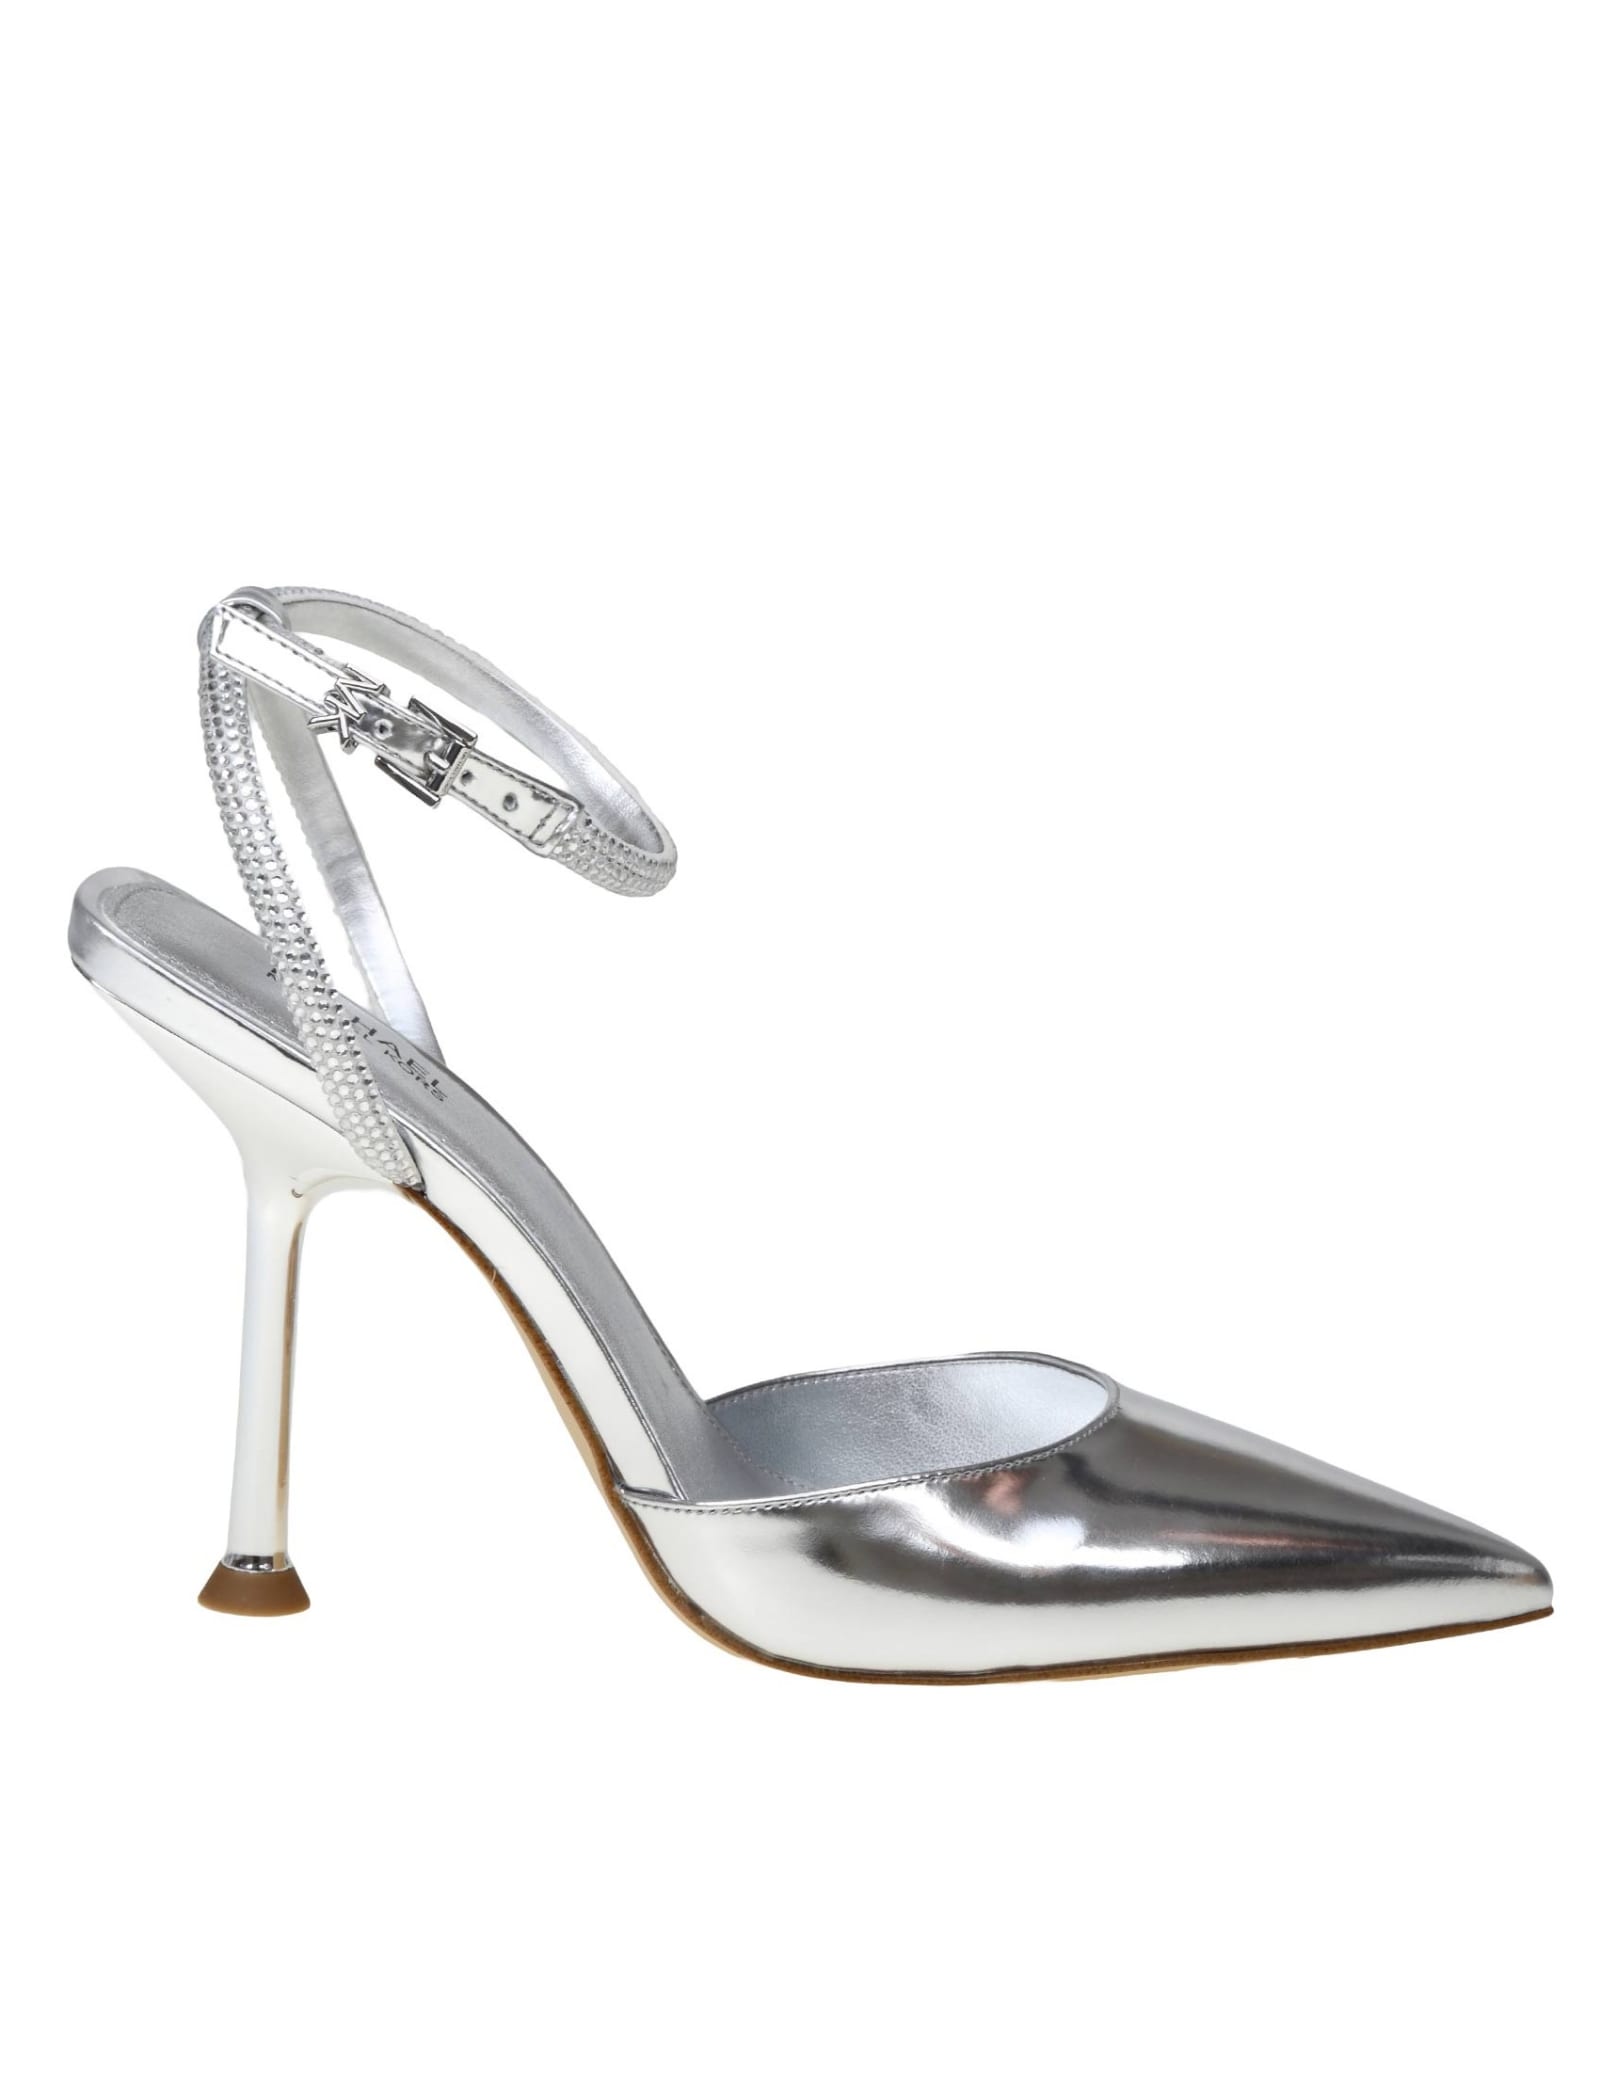 Michael Michael Kors Imani Pump In Silver Laminated Leather